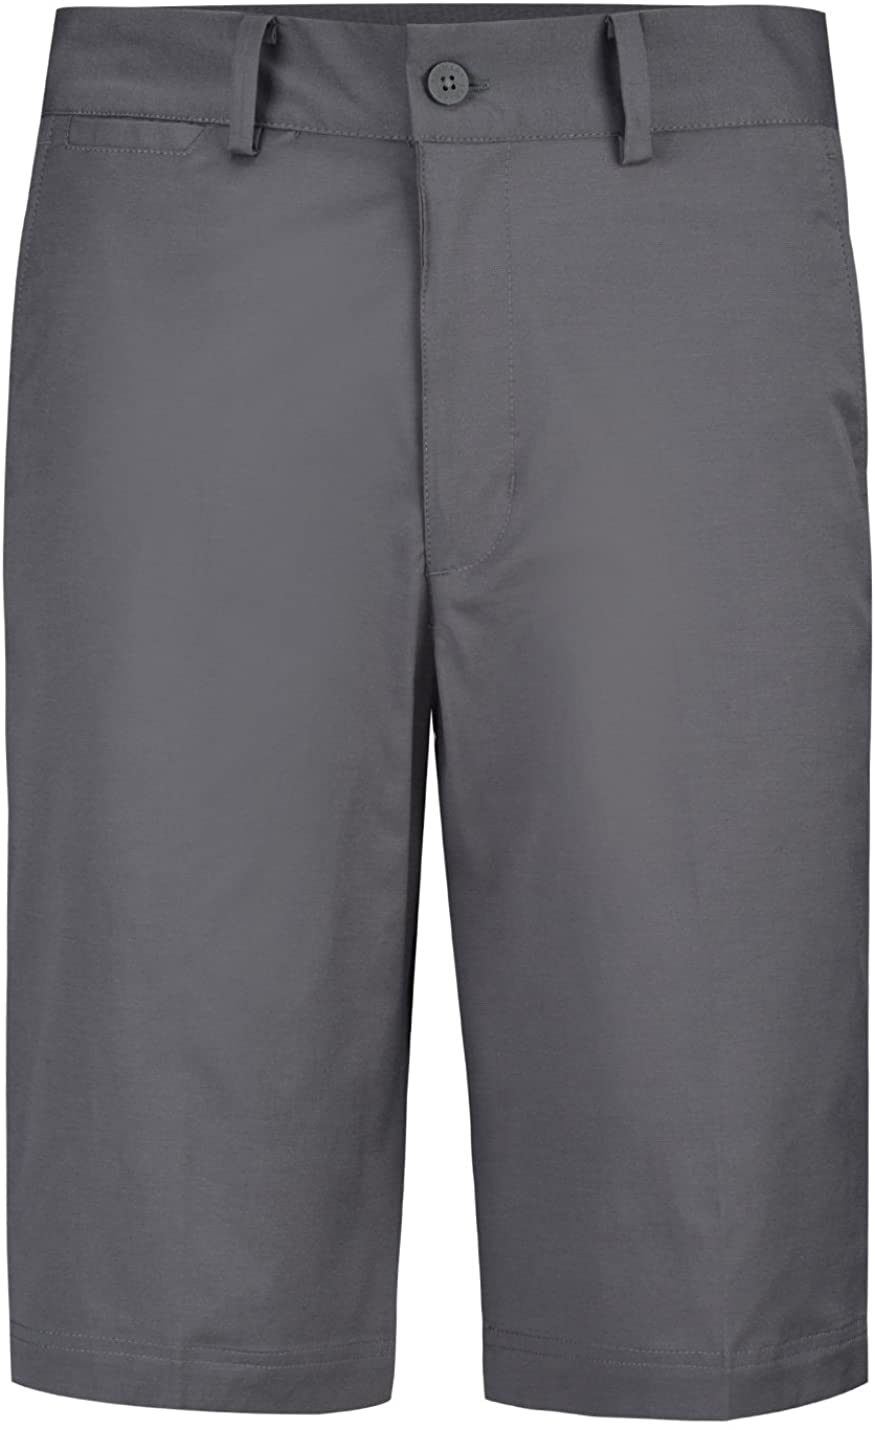 Lesmart Men's Golf Shorts Stretch Quick Dry Relaxed Fit Tech, Grey ...